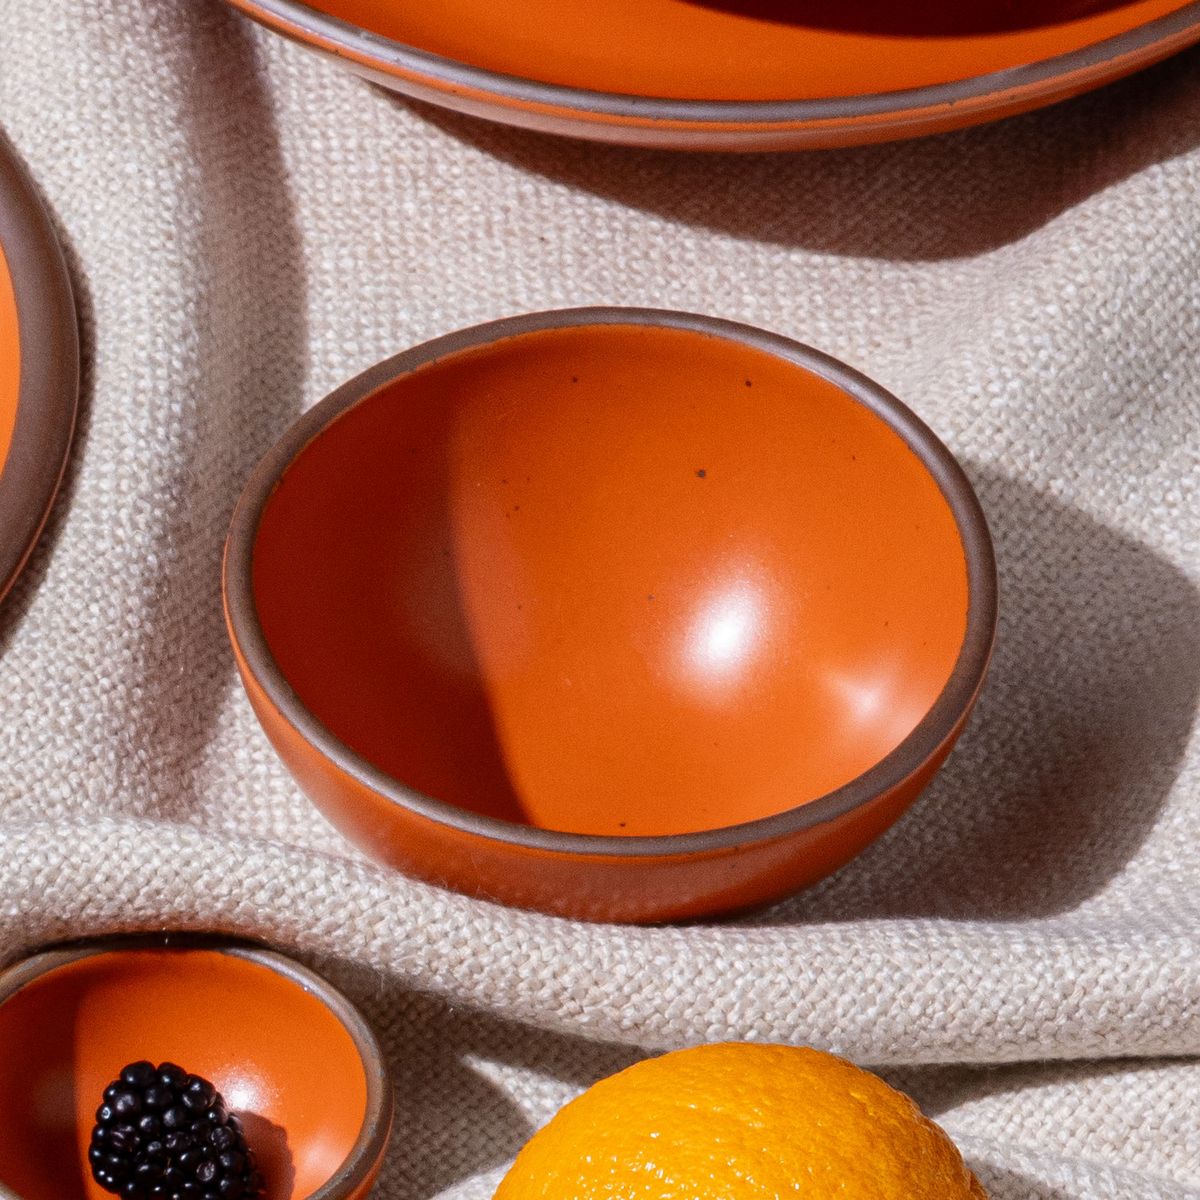 A small dessert sized rounded ceramic bowl in a bold orange color featuring iron speckles and an unglazed rim